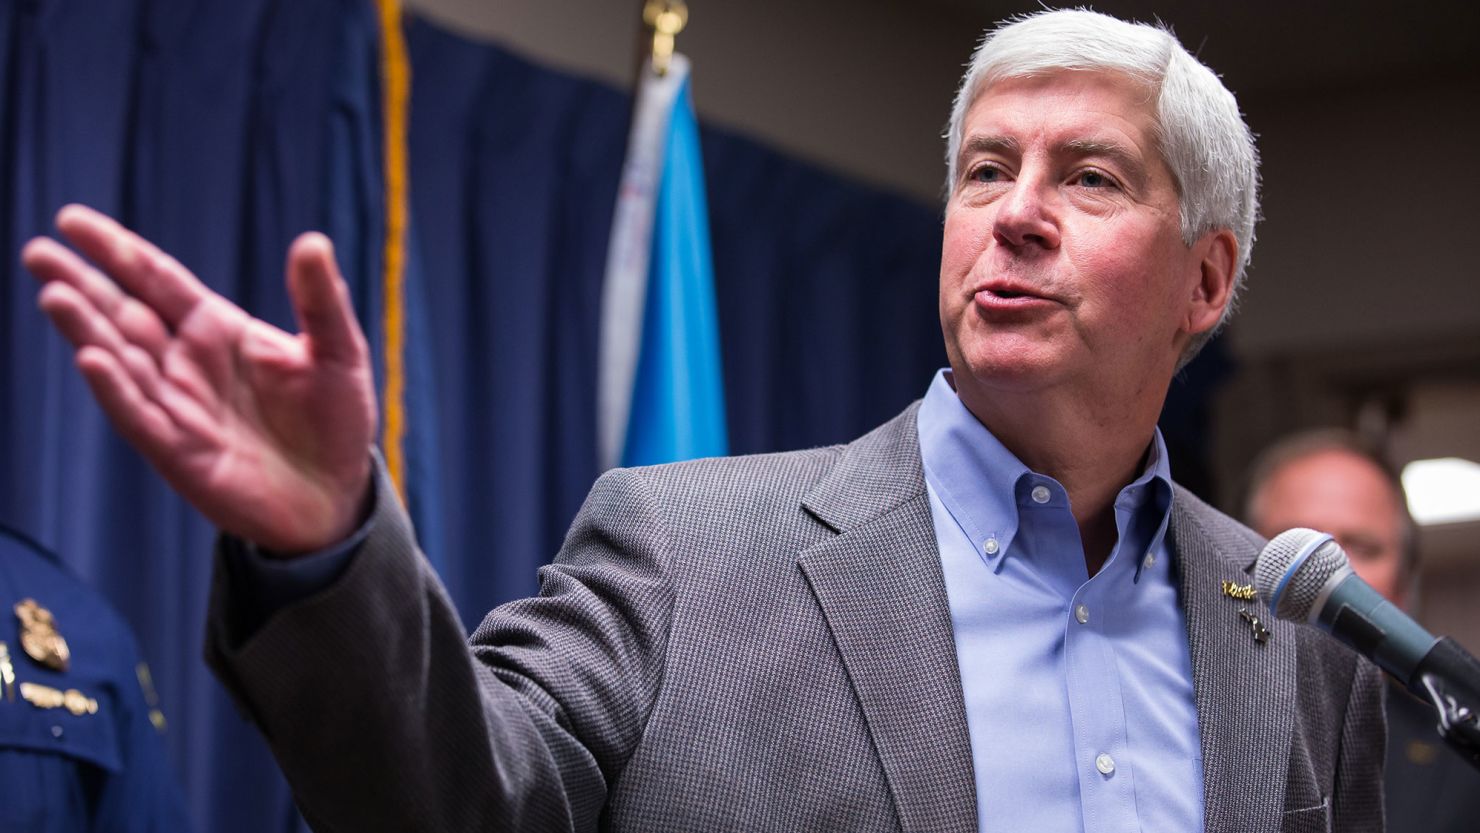  Michigan Gov. Rick Snyder is facing lawsuits and angry calls for his resignation over the Flint water crisis.